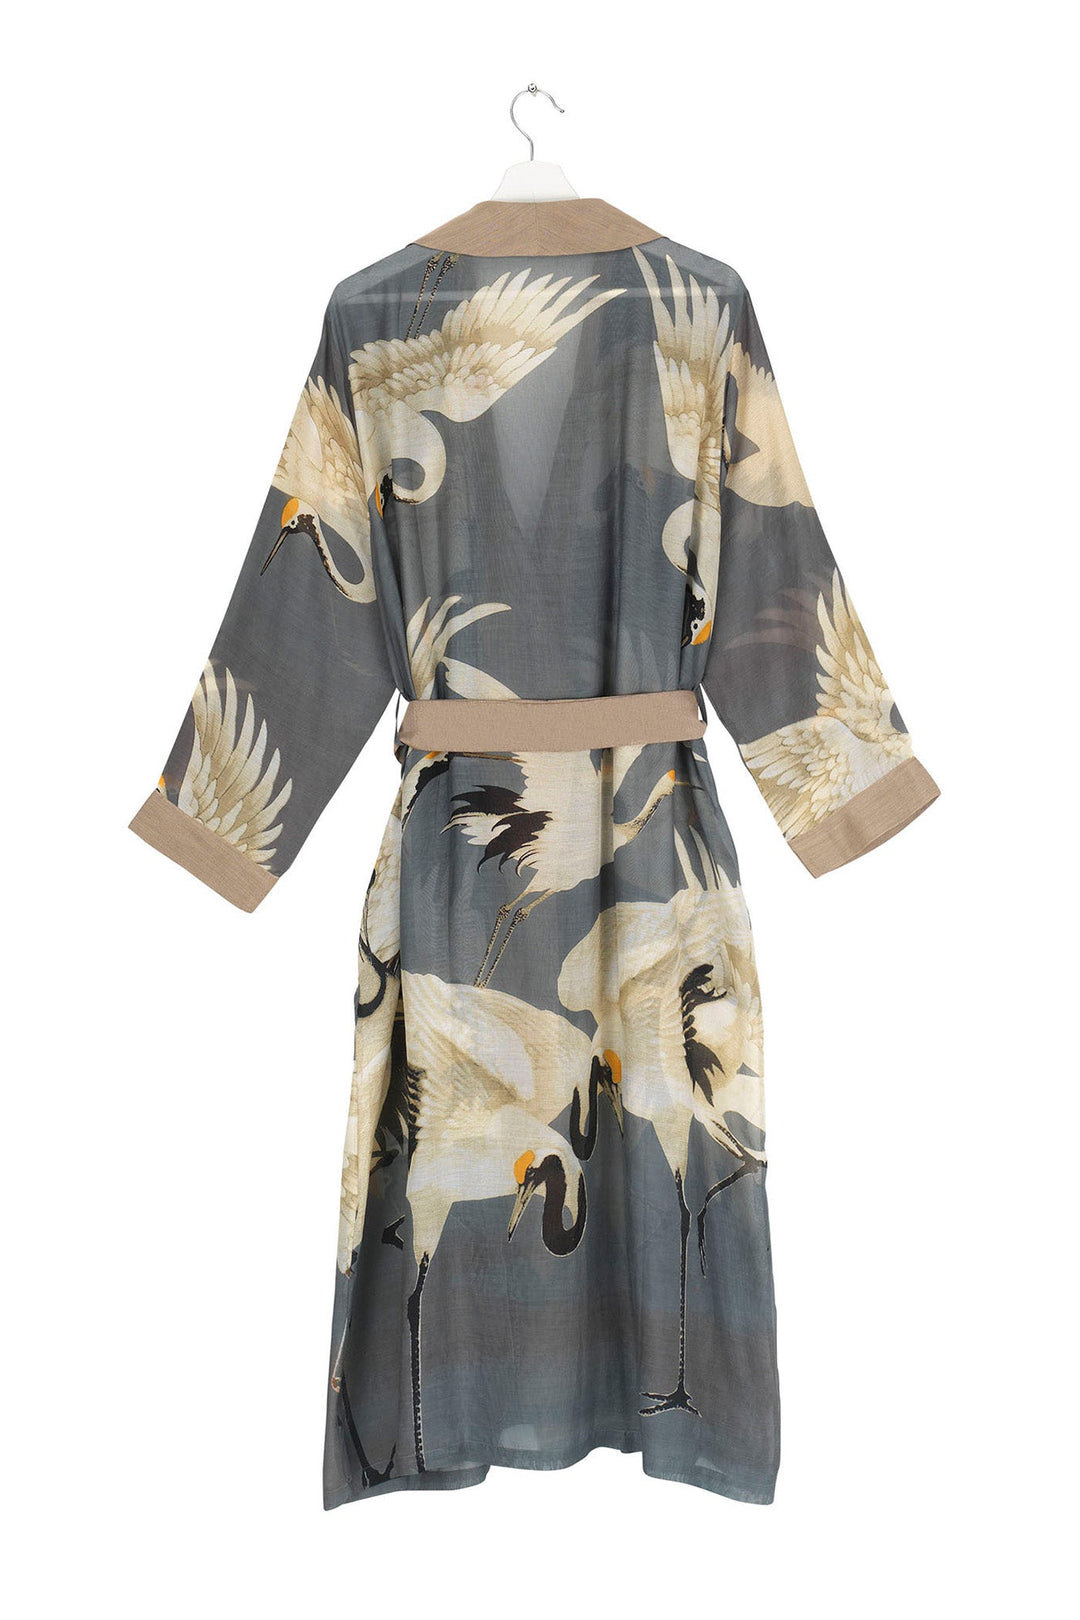 Storks and cranes have been a major art deco trend in both fashion and interiors and this robe perfect robe for anyone looking for something chic, stylish and in vouge! Made from a custom blend of modal and viscose which creates a silky lightweight material while having a more sustainable impact on the environment. 